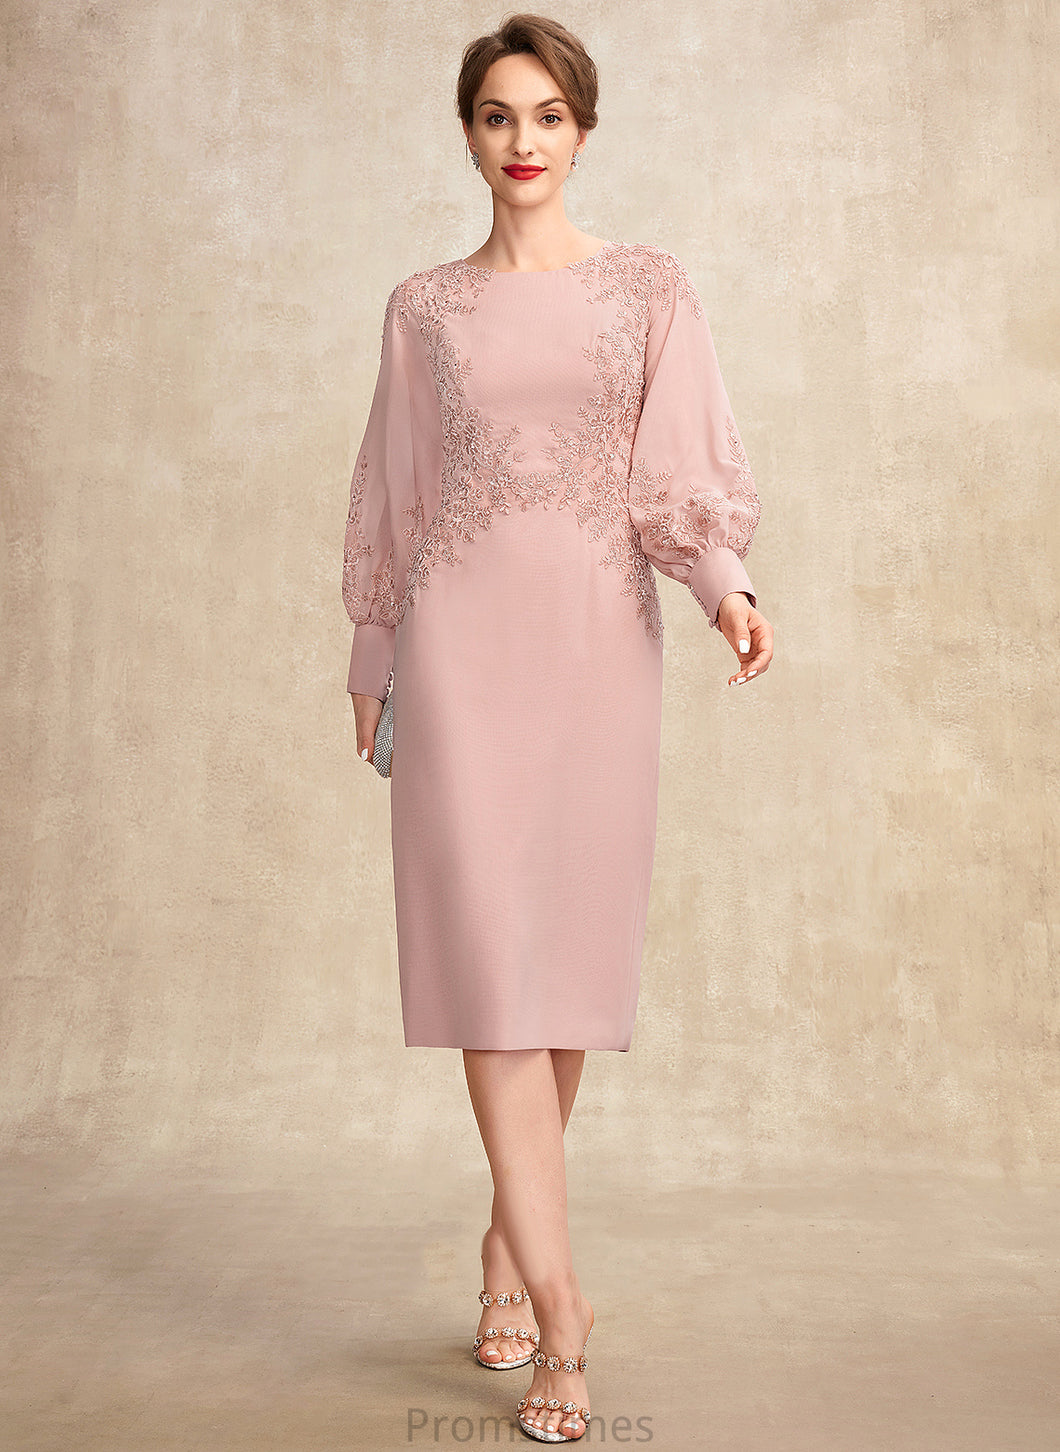 Bride Chiffon With Beading Sequins Knee-Length the Sheath/Column Lace Breanna of Mother of the Bride Dresses Scoop Neck Dress Mother